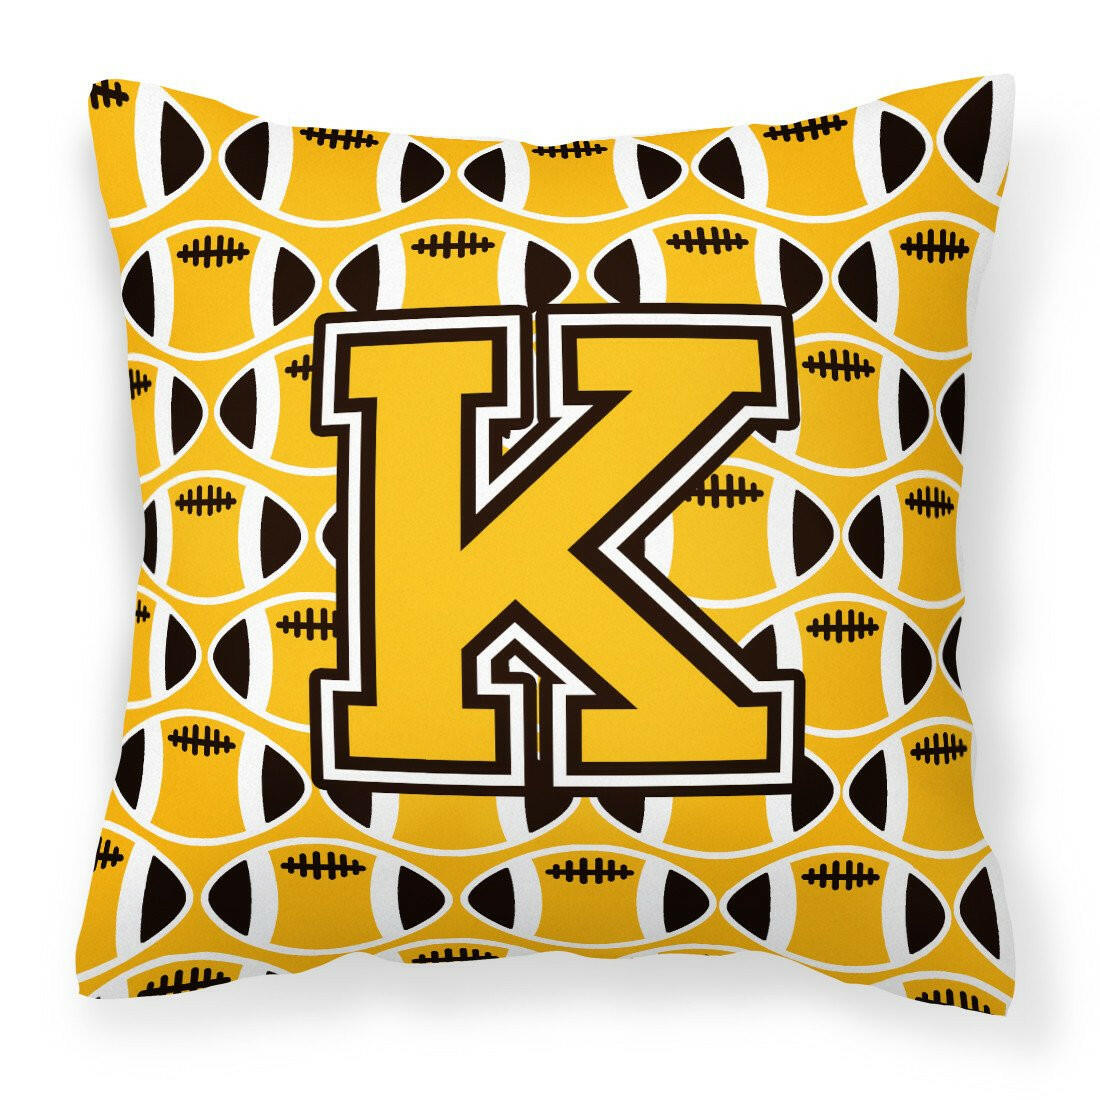 Letter K Football Black, Old Gold and White Fabric Decorative Pillow CJ1080-KPW1414 by Caroline's Treasures